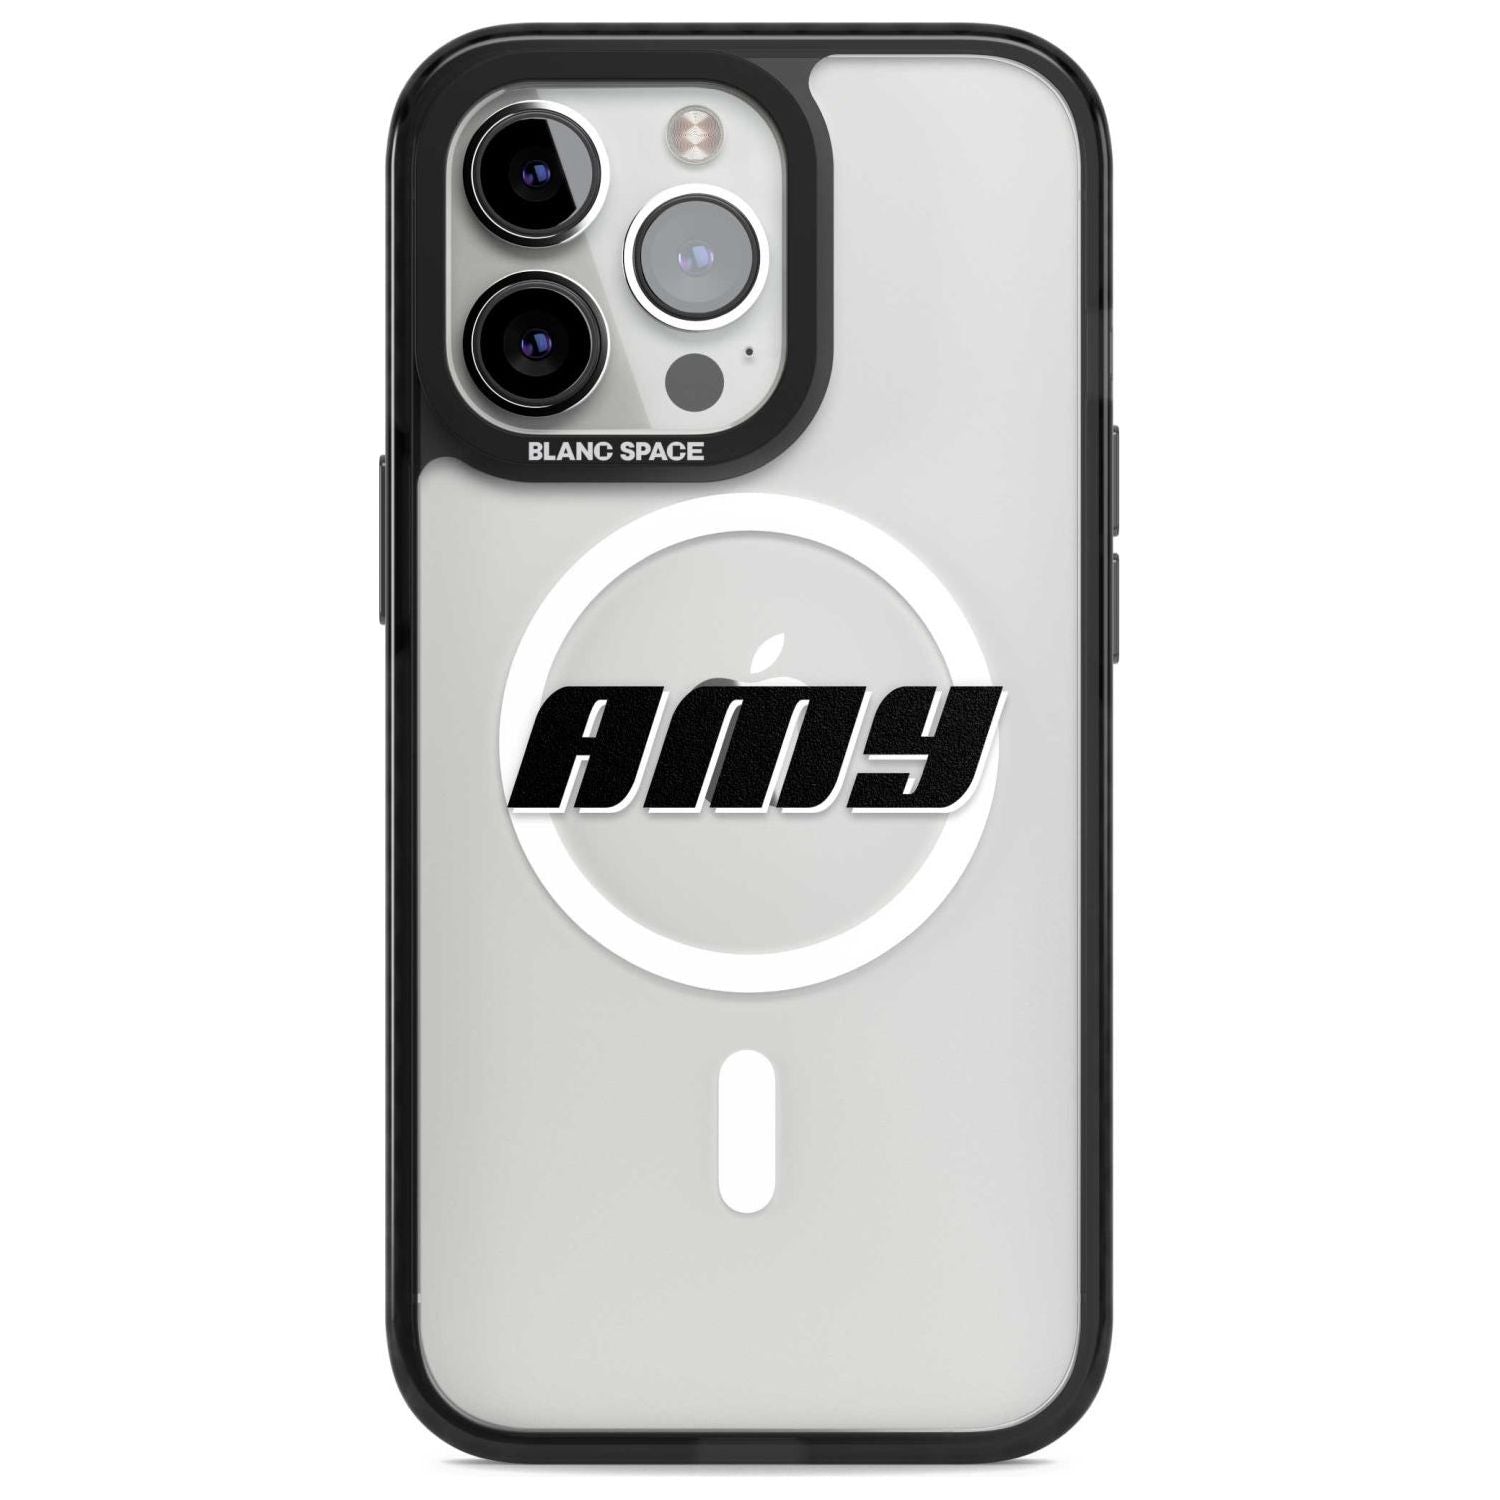 Personalised Clear Text  1C Custom Phone Case iPhone 15 Pro Max / Magsafe Black Impact Case,iPhone 15 Pro / Magsafe Black Impact Case,iPhone 14 Pro Max / Magsafe Black Impact Case,iPhone 14 Pro / Magsafe Black Impact Case,iPhone 13 Pro / Magsafe Black Impact Case Blanc Space